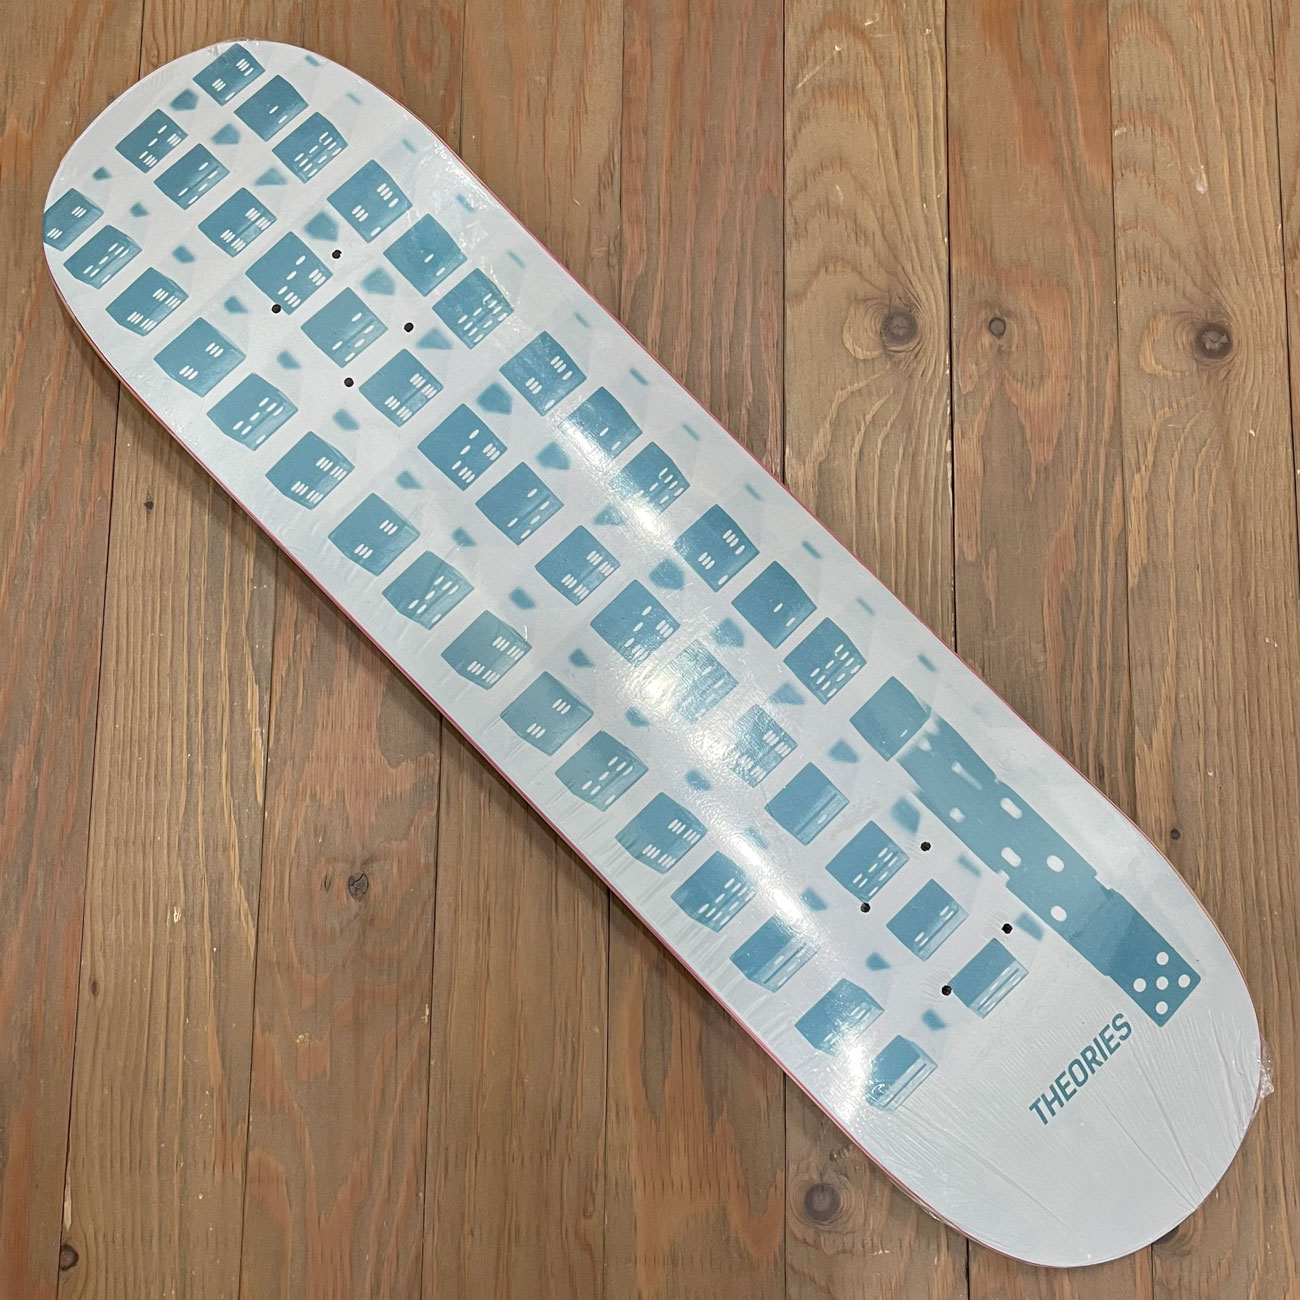 THEORIES DOMINO THEORY DECK 8.0inch